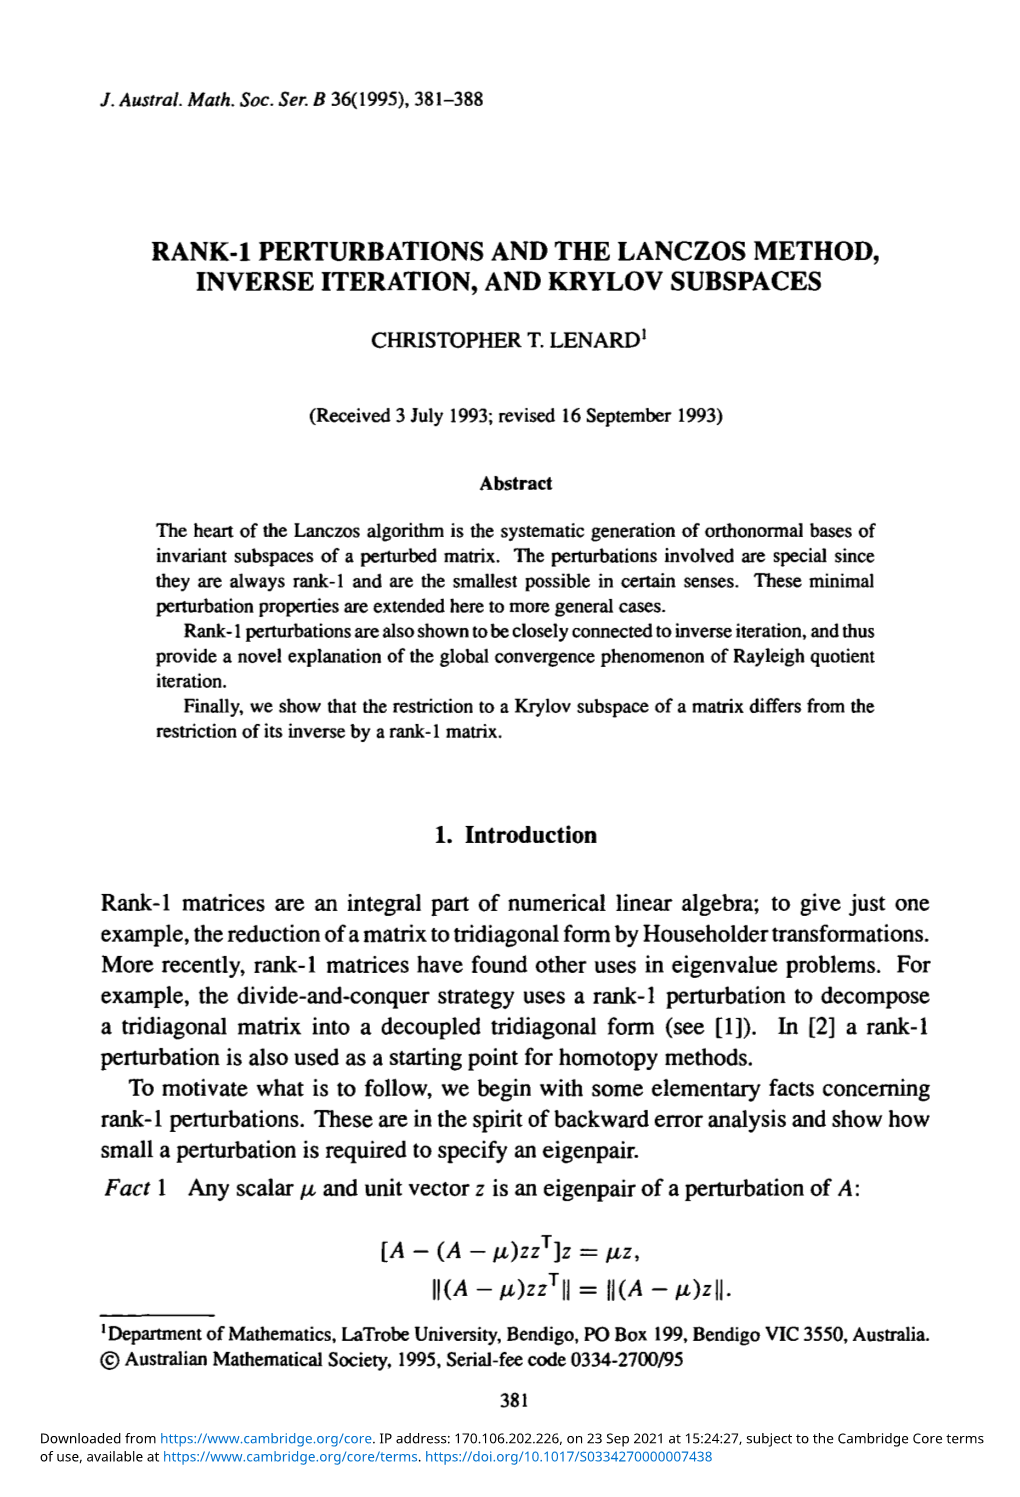 Rank-1 Perturbations and the Lanczos Method, Inverse Iteration, and Krylov Subspaces